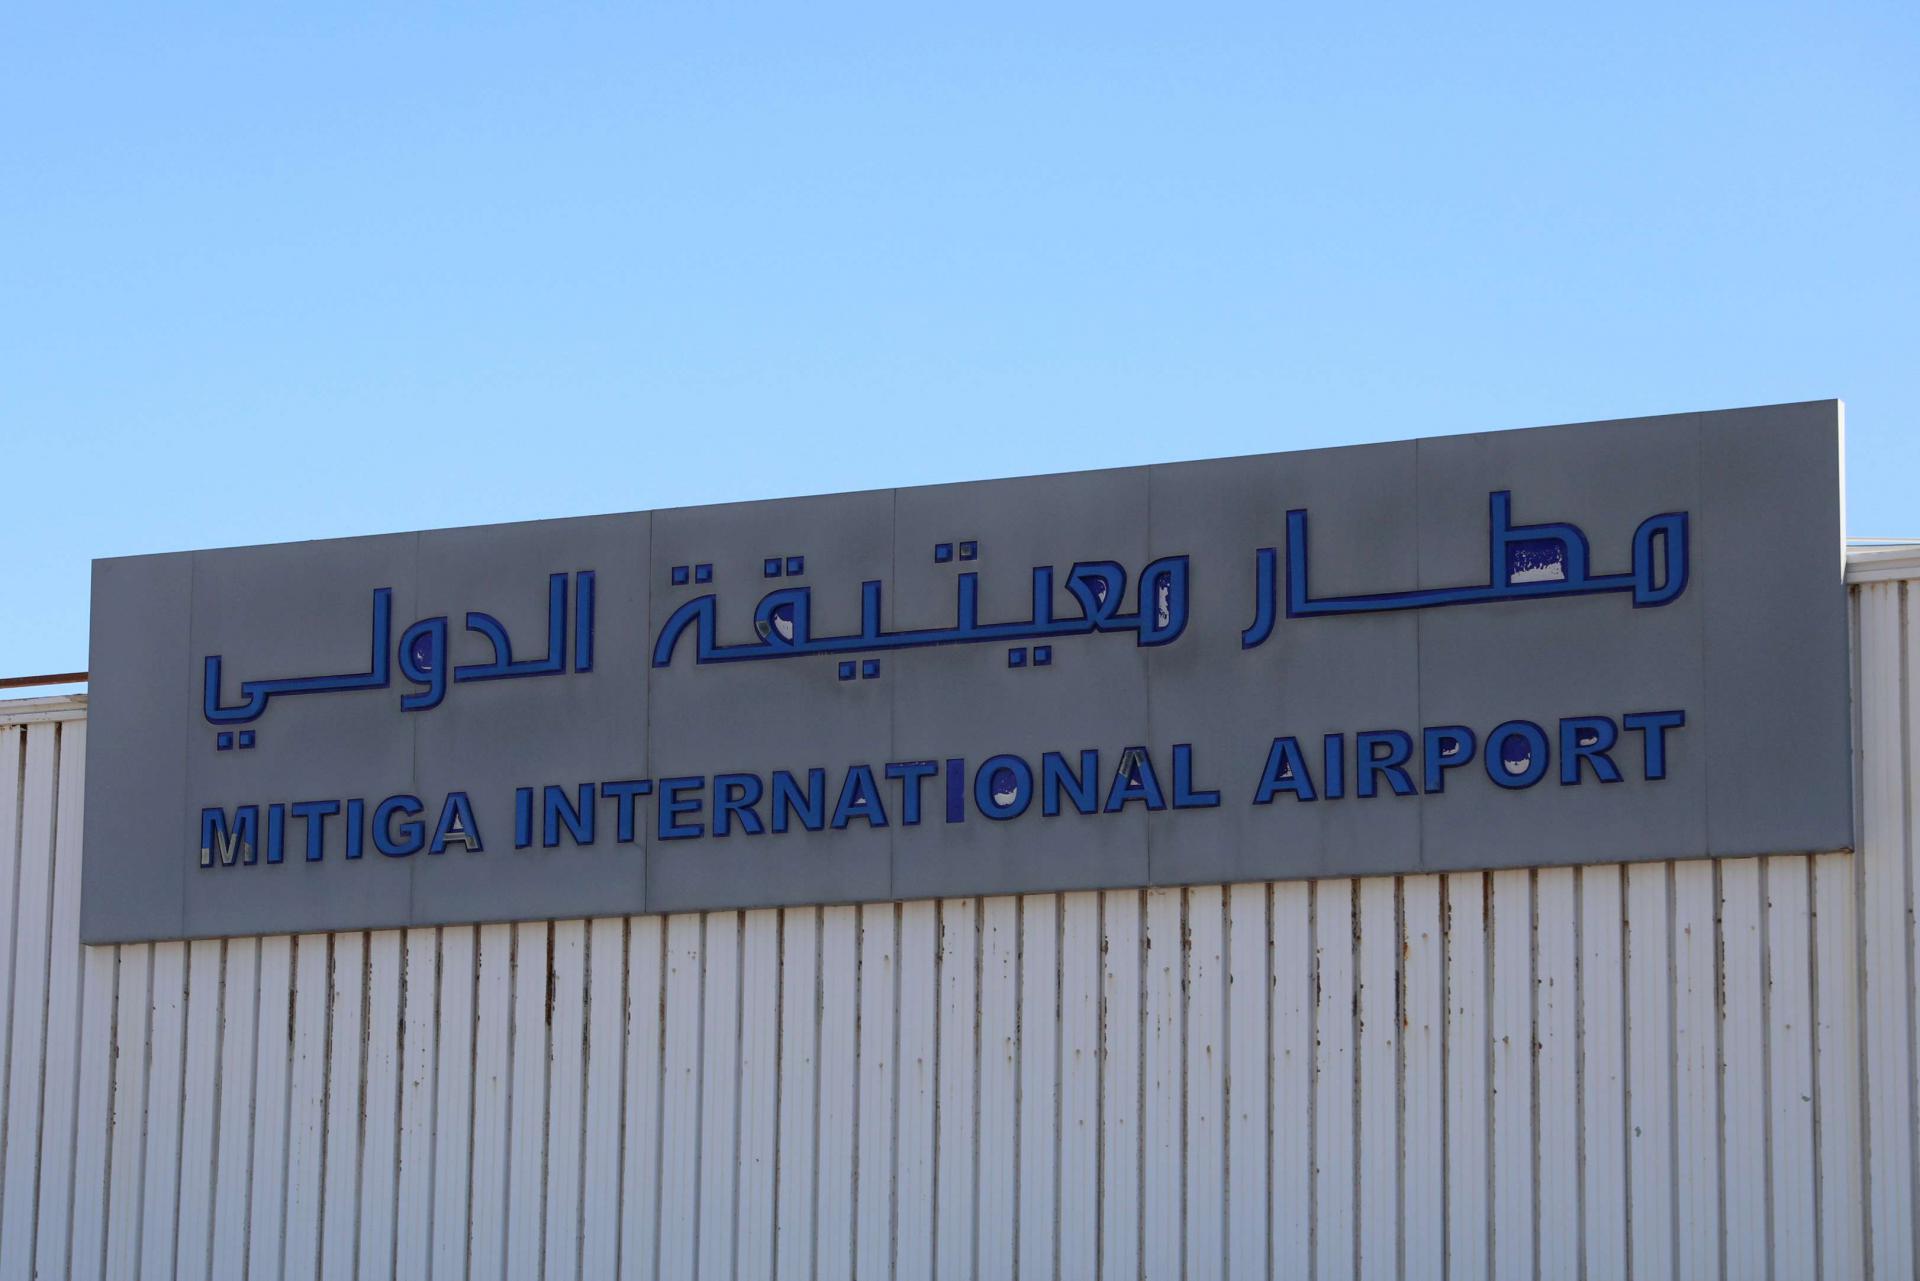 The reopening of the airport is a boon for travellers to the Libyan capital